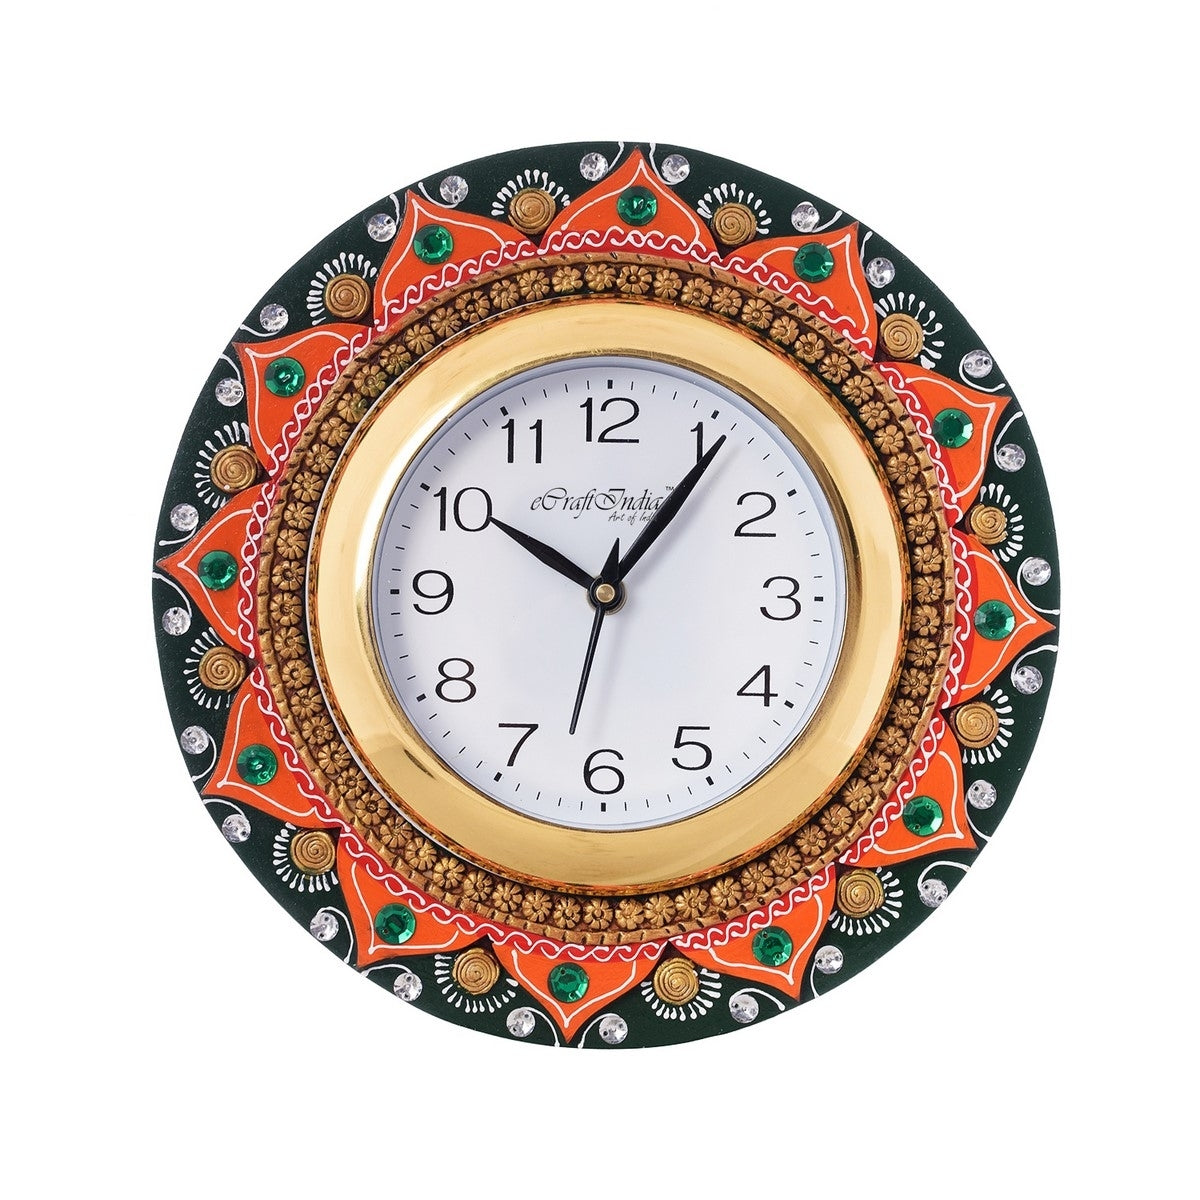 Crystal Studded Floral Shape Papier-Mache Wooden Handcrafted Wall Clock